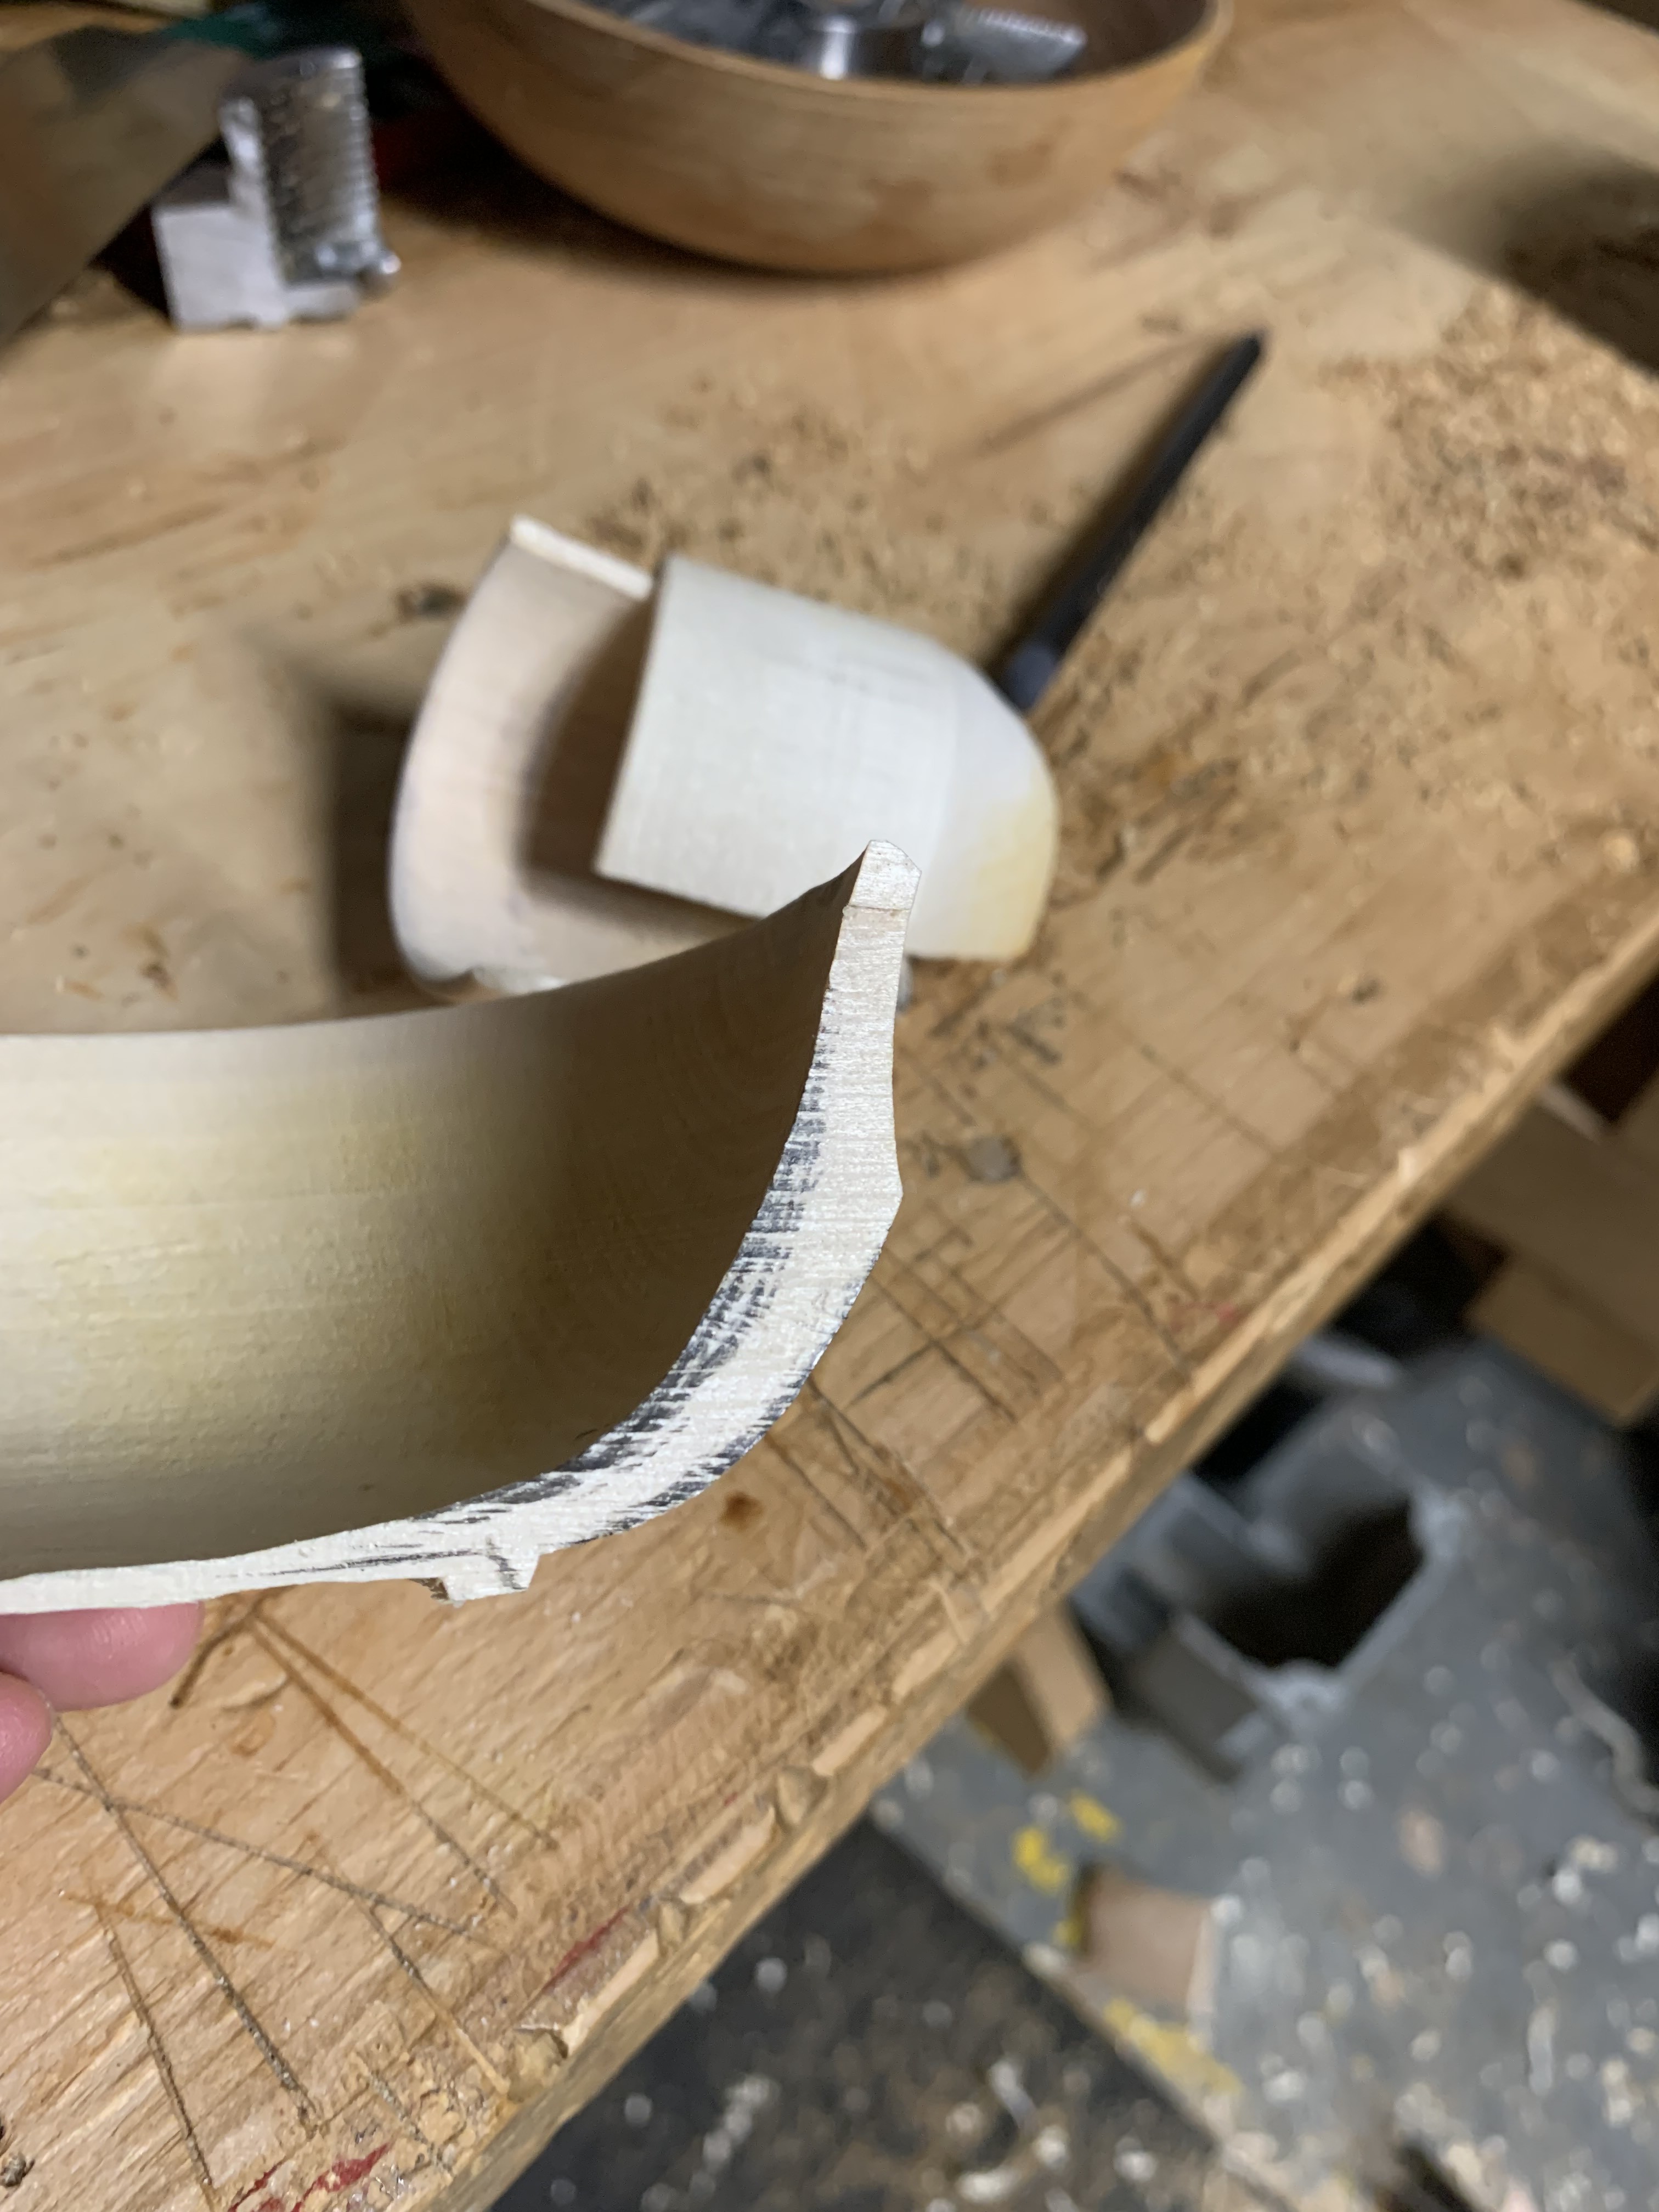 A bowl turned by Mary that's cut in half. The bowl is thin at the bottom and has pencil marks